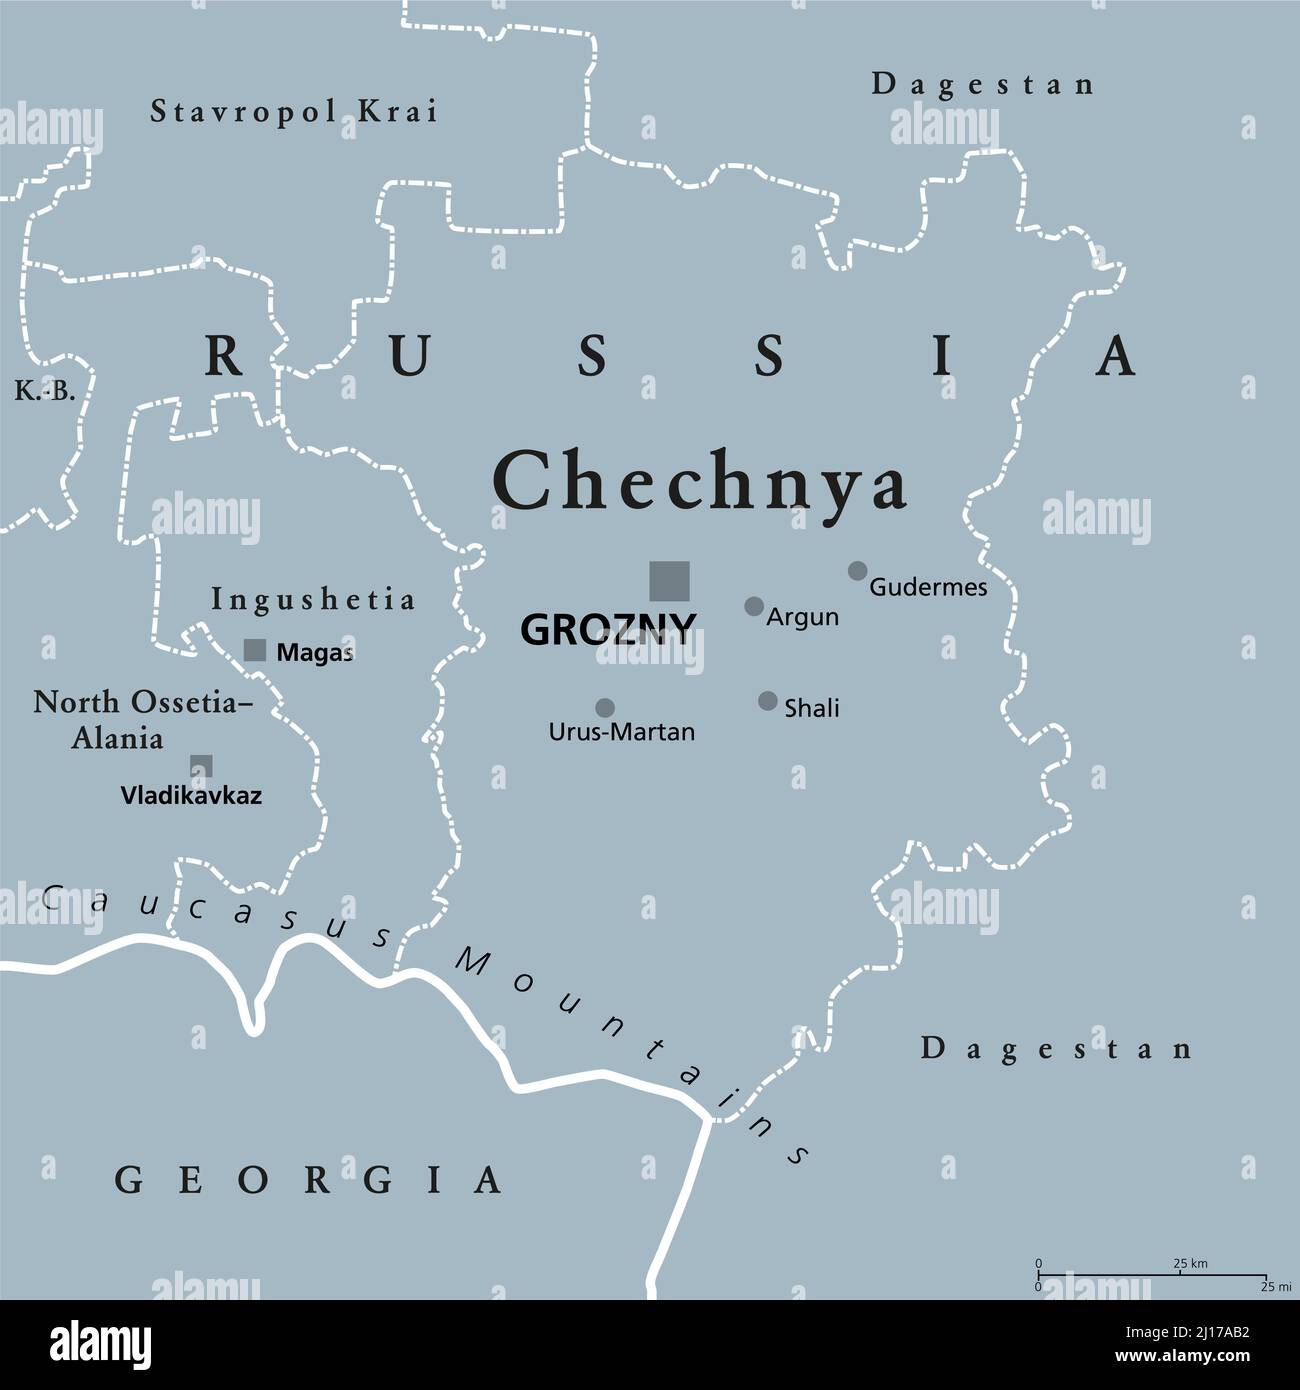 Chechnya, gray political map with capital Grozny and borders. Chechen Republic, a republic of Russia, and part of the North Caucasus Federal District. Stock Photo